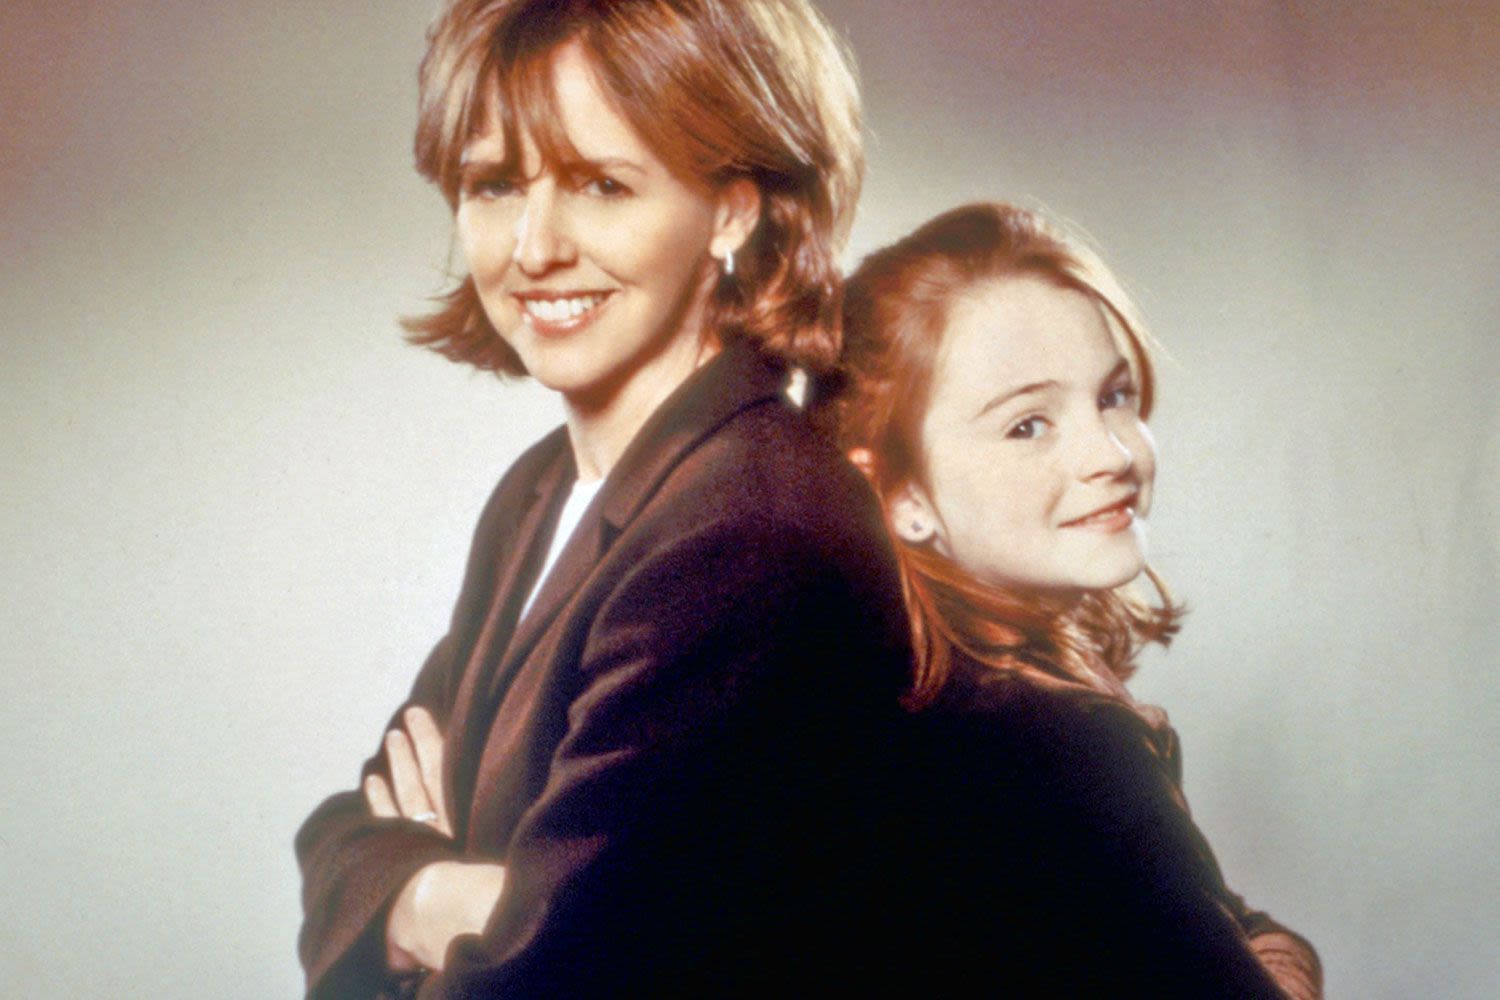 Nancy Meyers marks 'Parent Trap' anniversary, Lindsay Lohan calls it an 'incredible, life-changing experience'